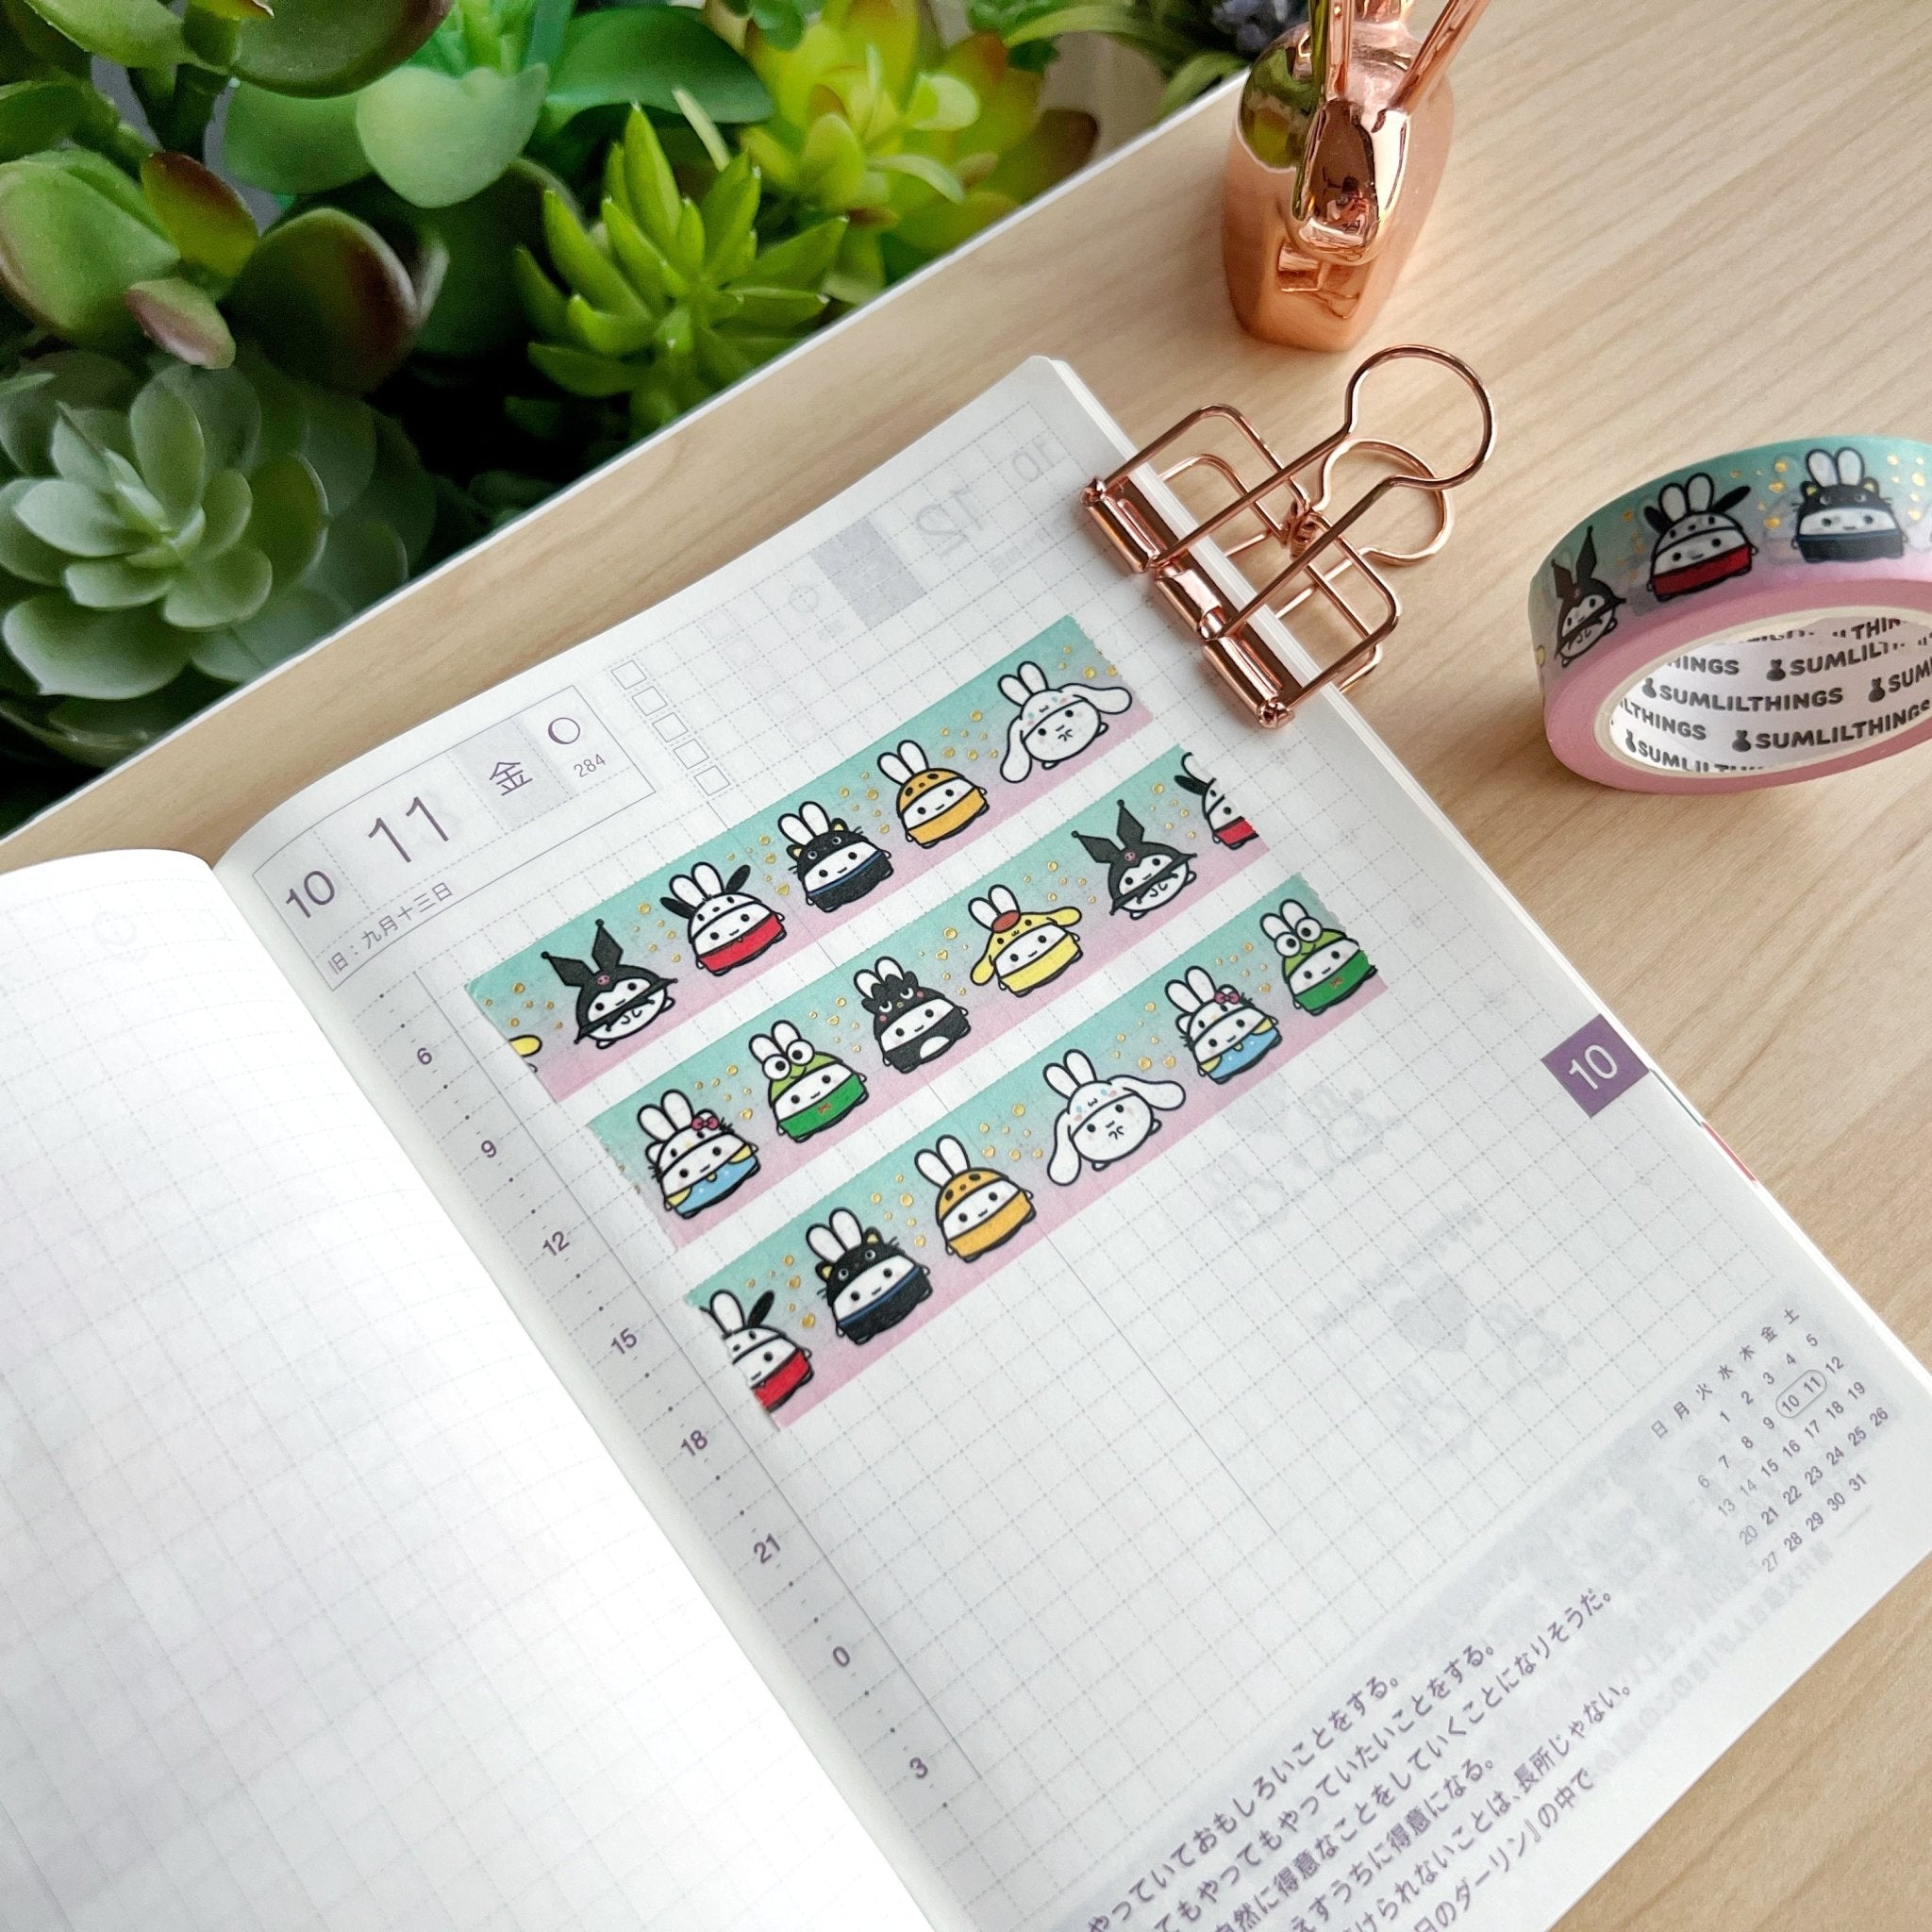 Washi Tape - Lil' Sanlilo 3.0 (15mm) - Holo Gold Foil - SumLilThings